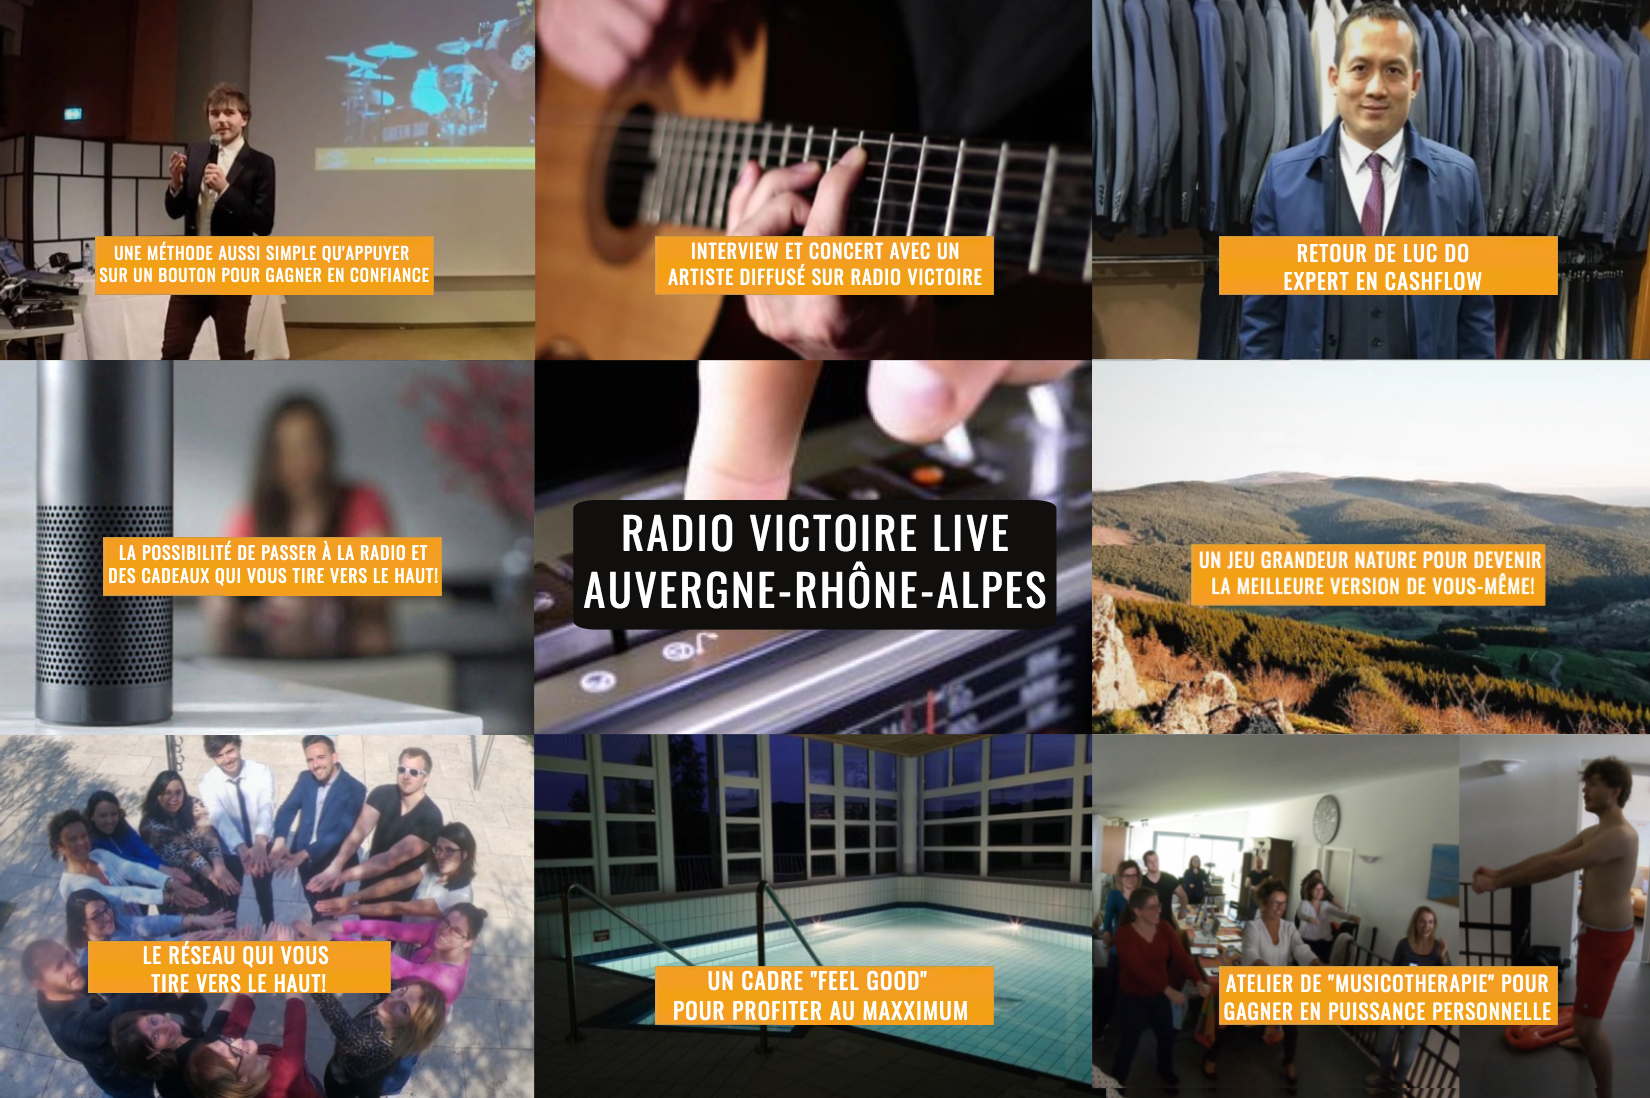 Radio-Victoire-Live-2019.png (2.43 MB)